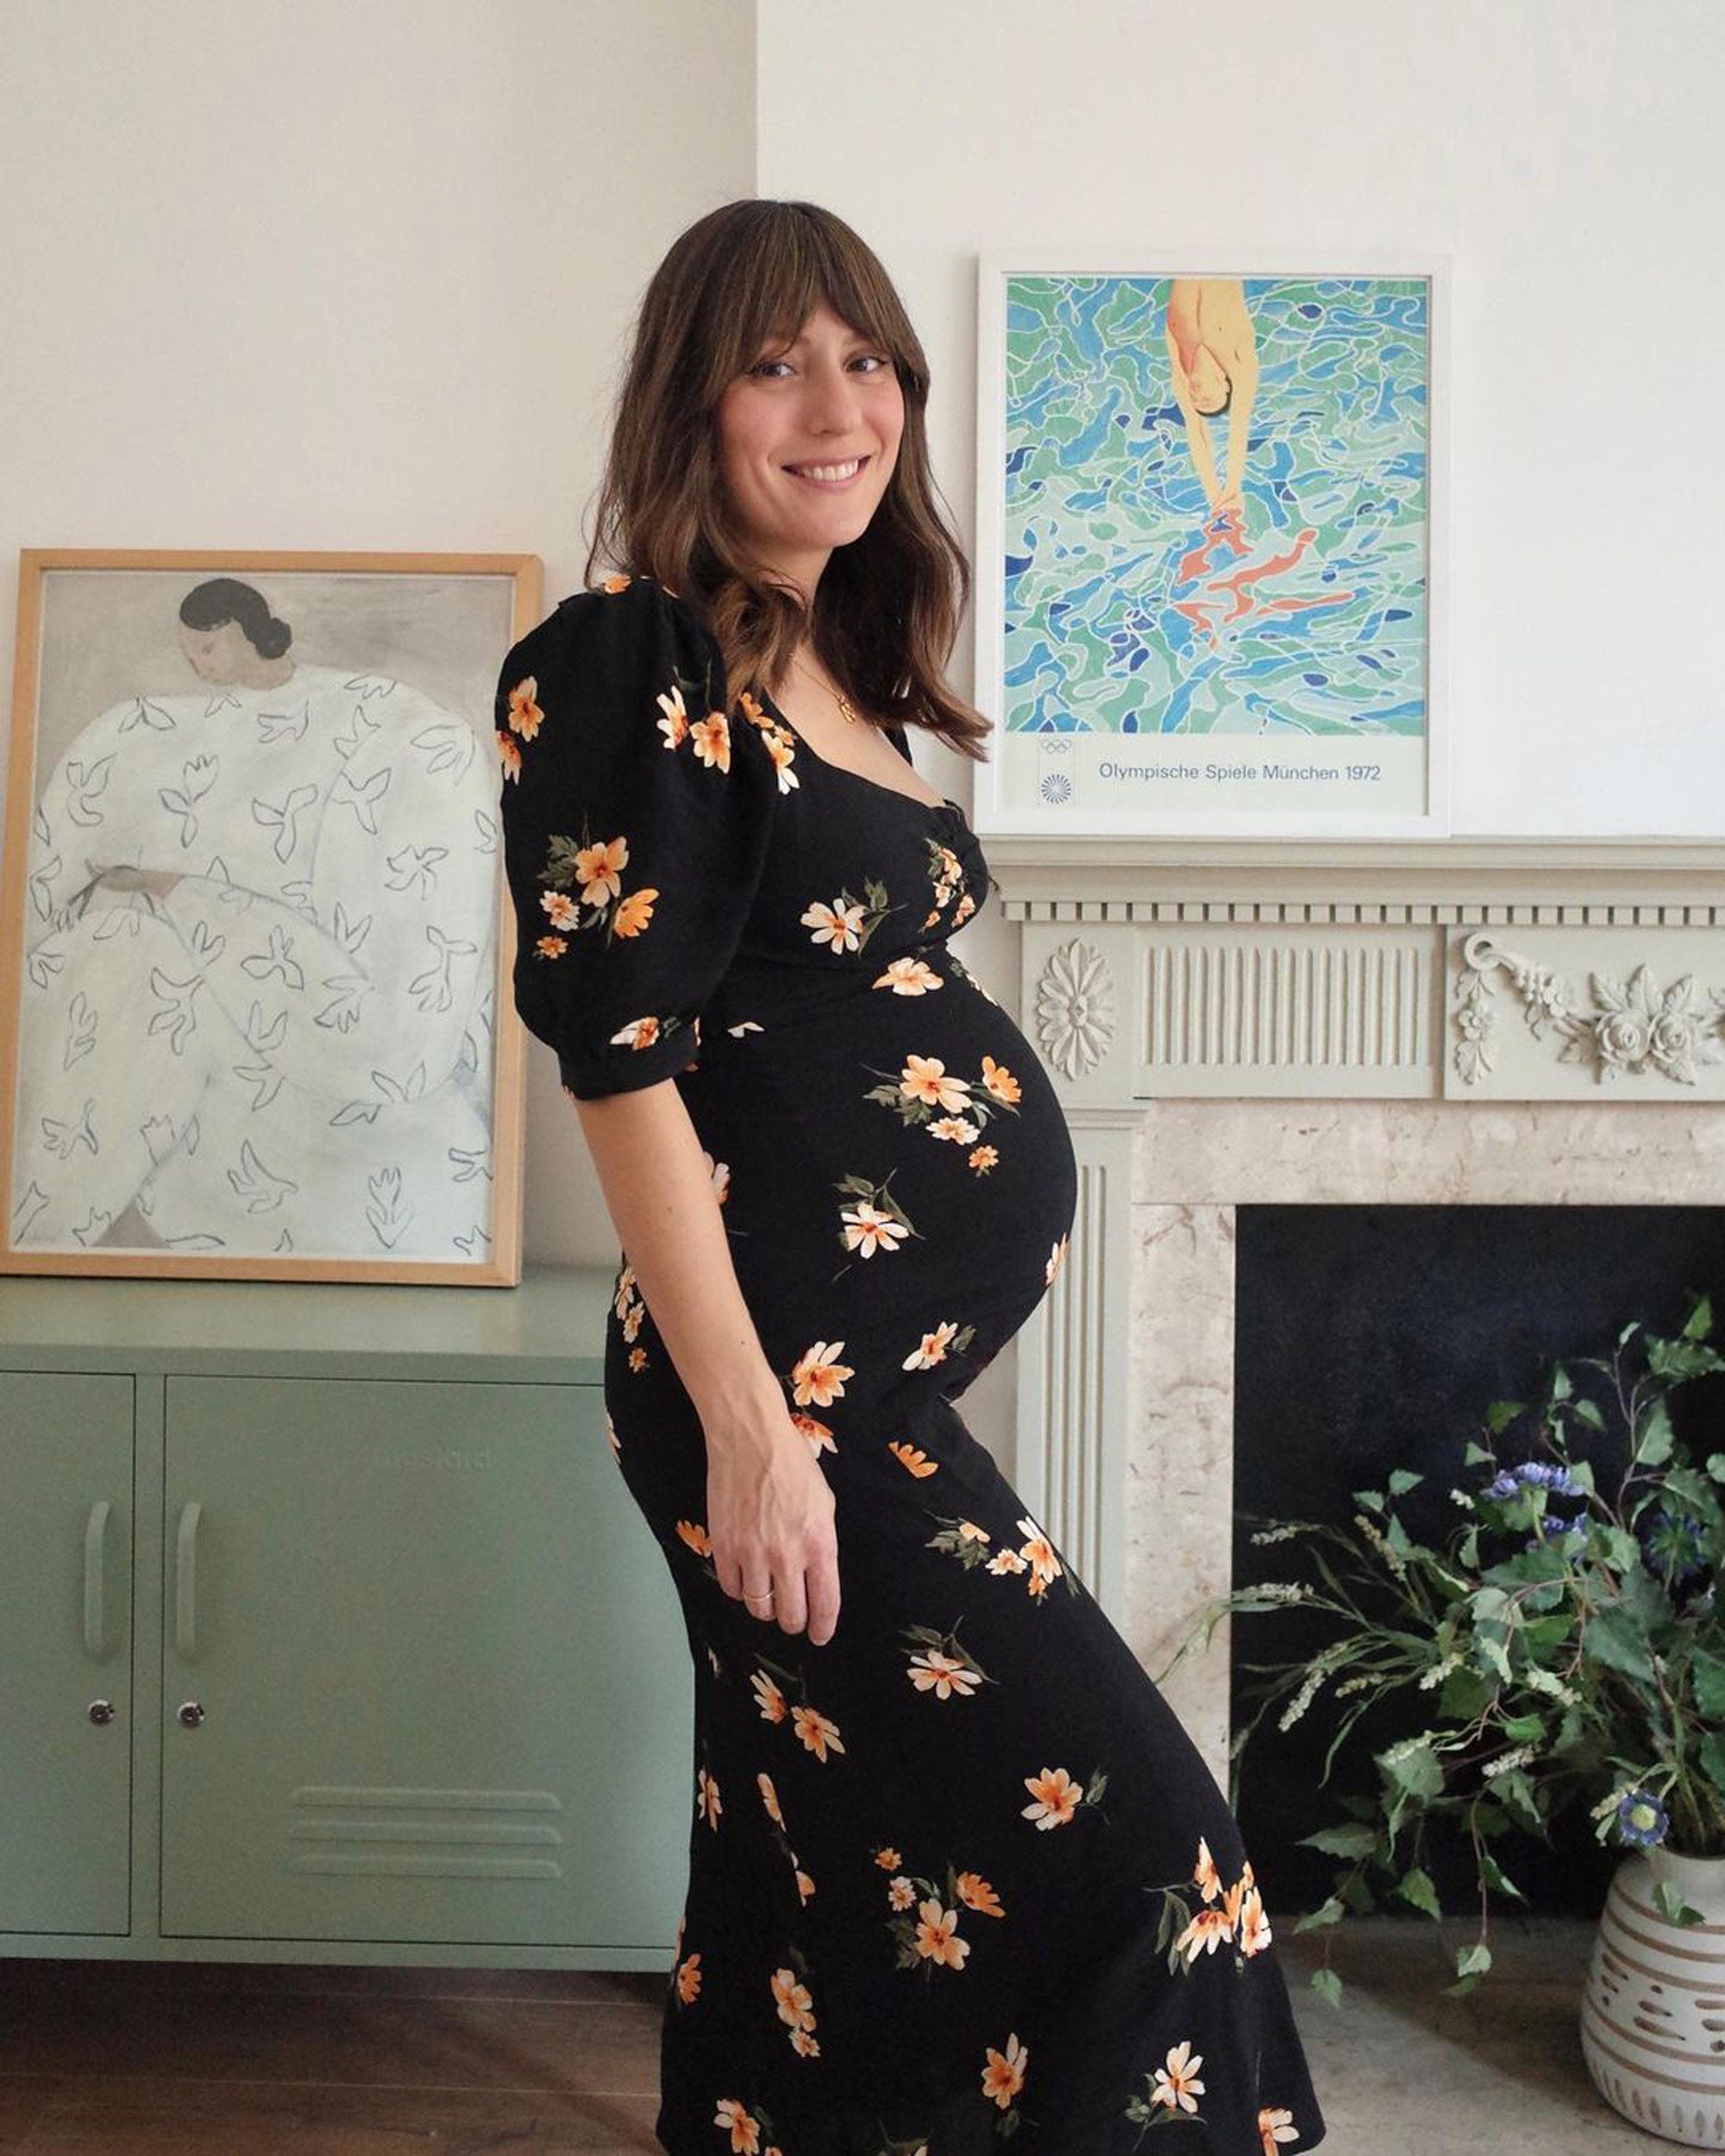 What Do Women Actually Want From Maternity Fashion?